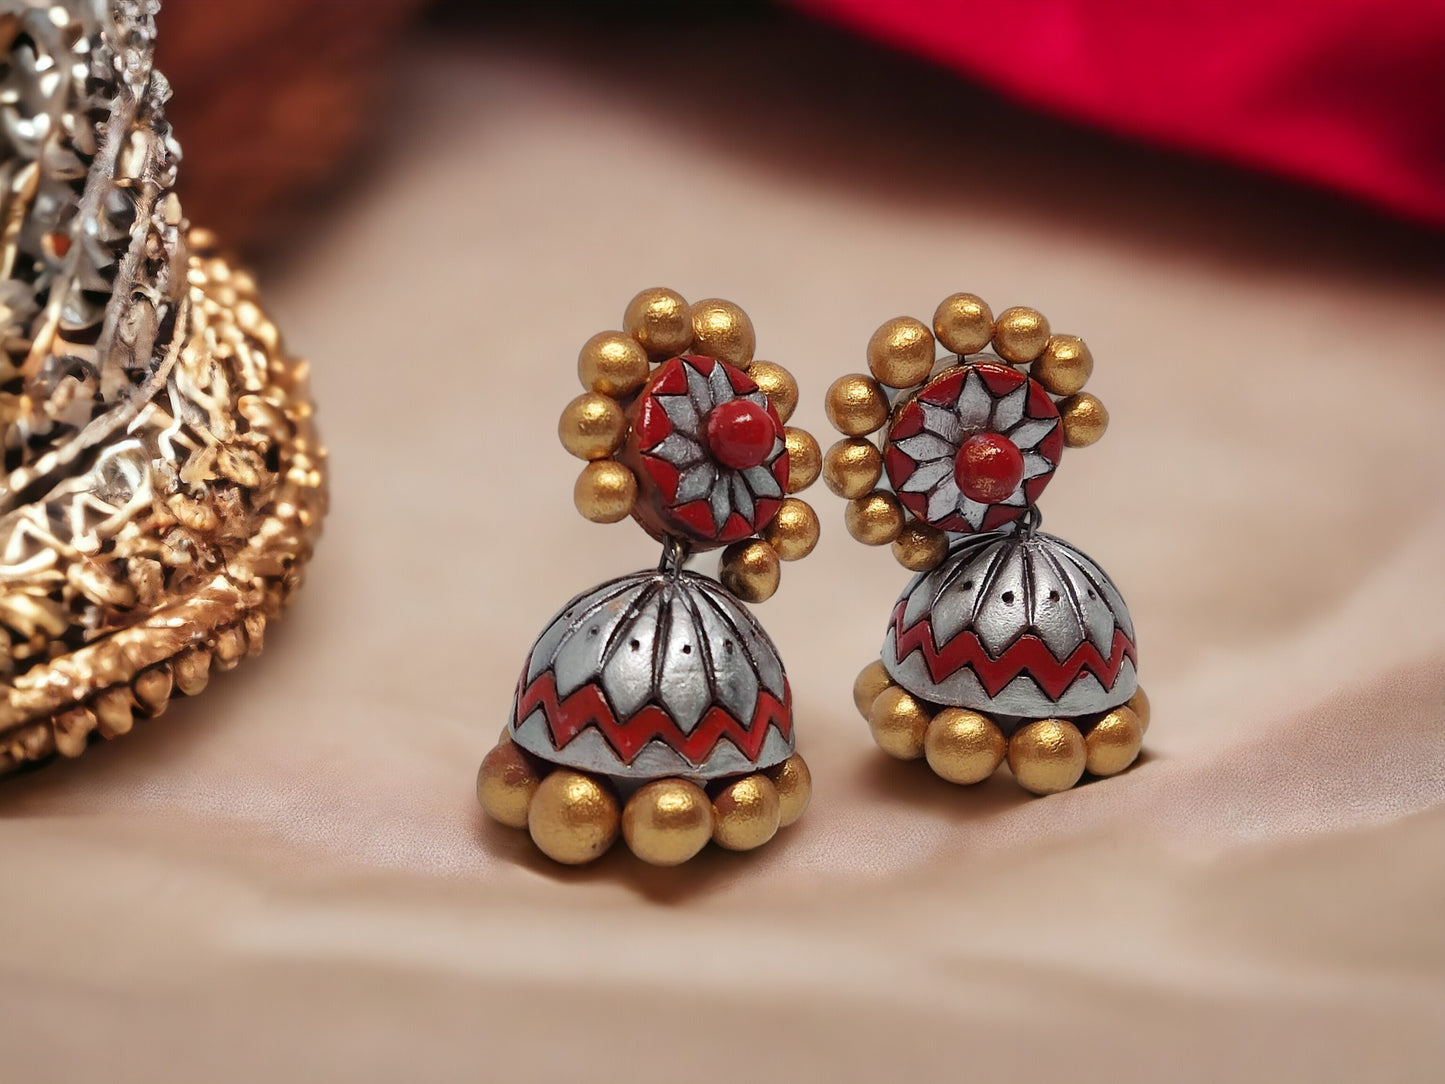 <p data-mce-fragment="1">Elevate your style with Aamodini Terracotta Jhumkas, inspired by nature and made from natural earthen clay. These handcrafted earrings from anusangicollections are perfect for those with metal allergies, as they are skin-friendly. Add a touch of elegance to any outfit with our color-customizable jhumkas.</p>